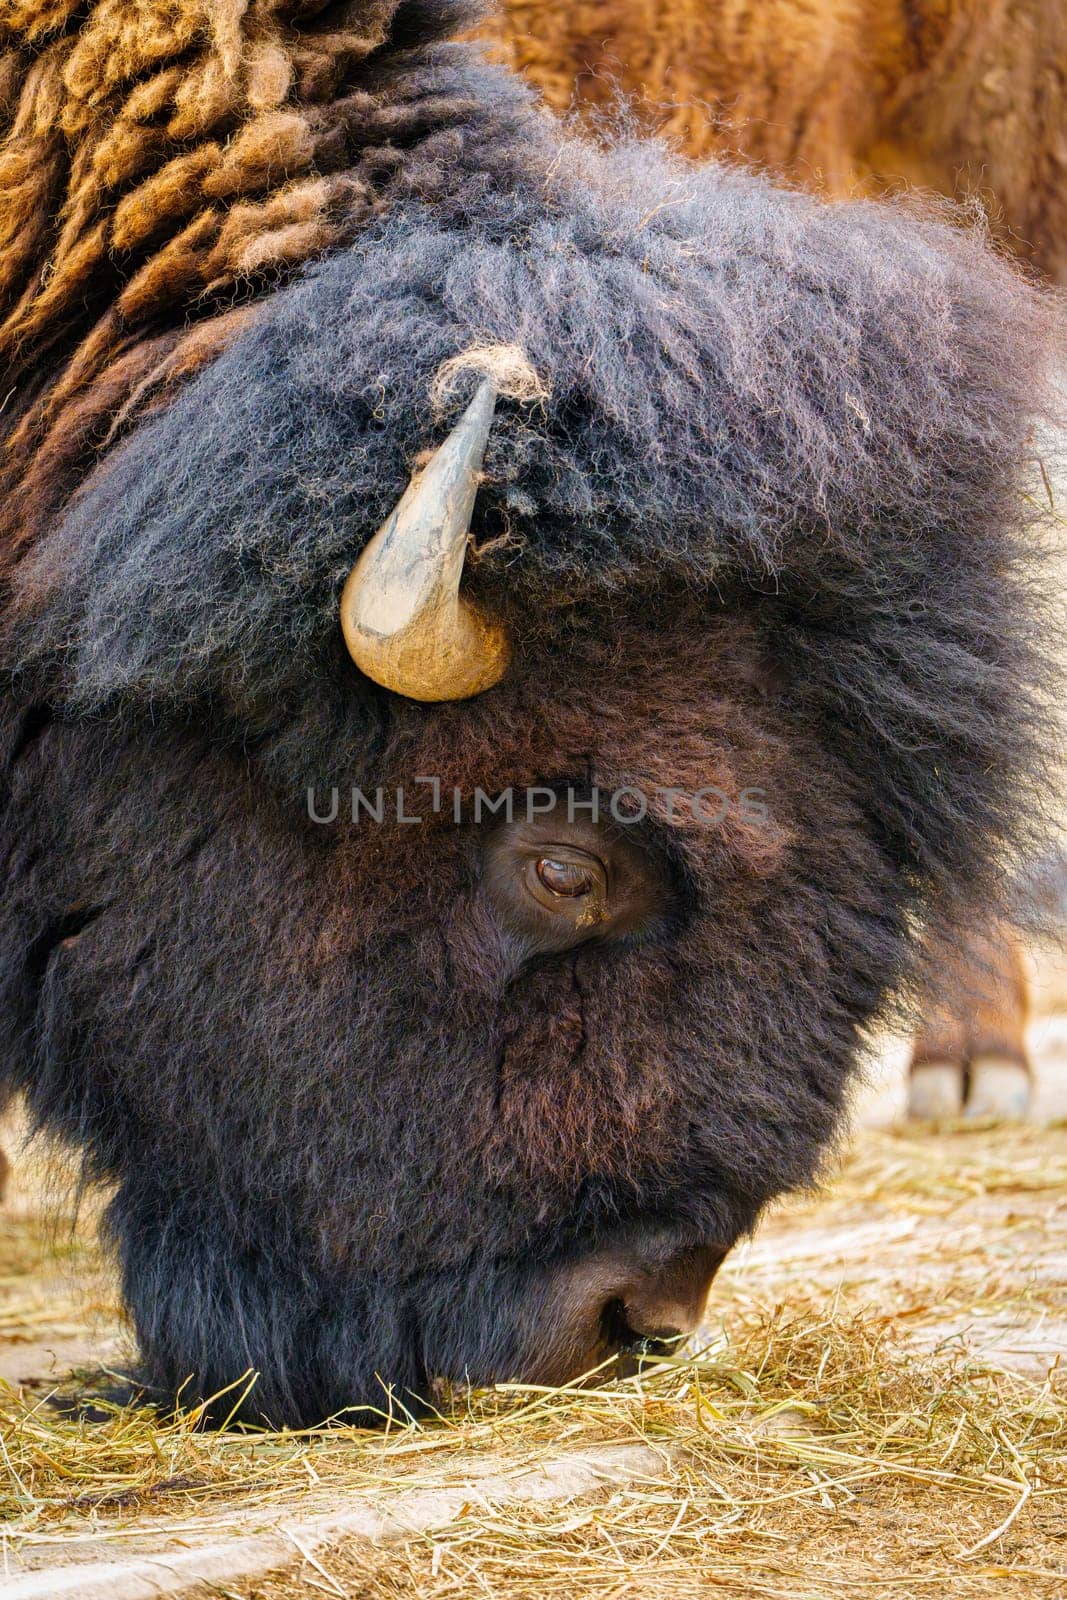 Bison Feeding on Dry Grass in Close-up - Wildlife Nature Portrait Photography by PhotoTime